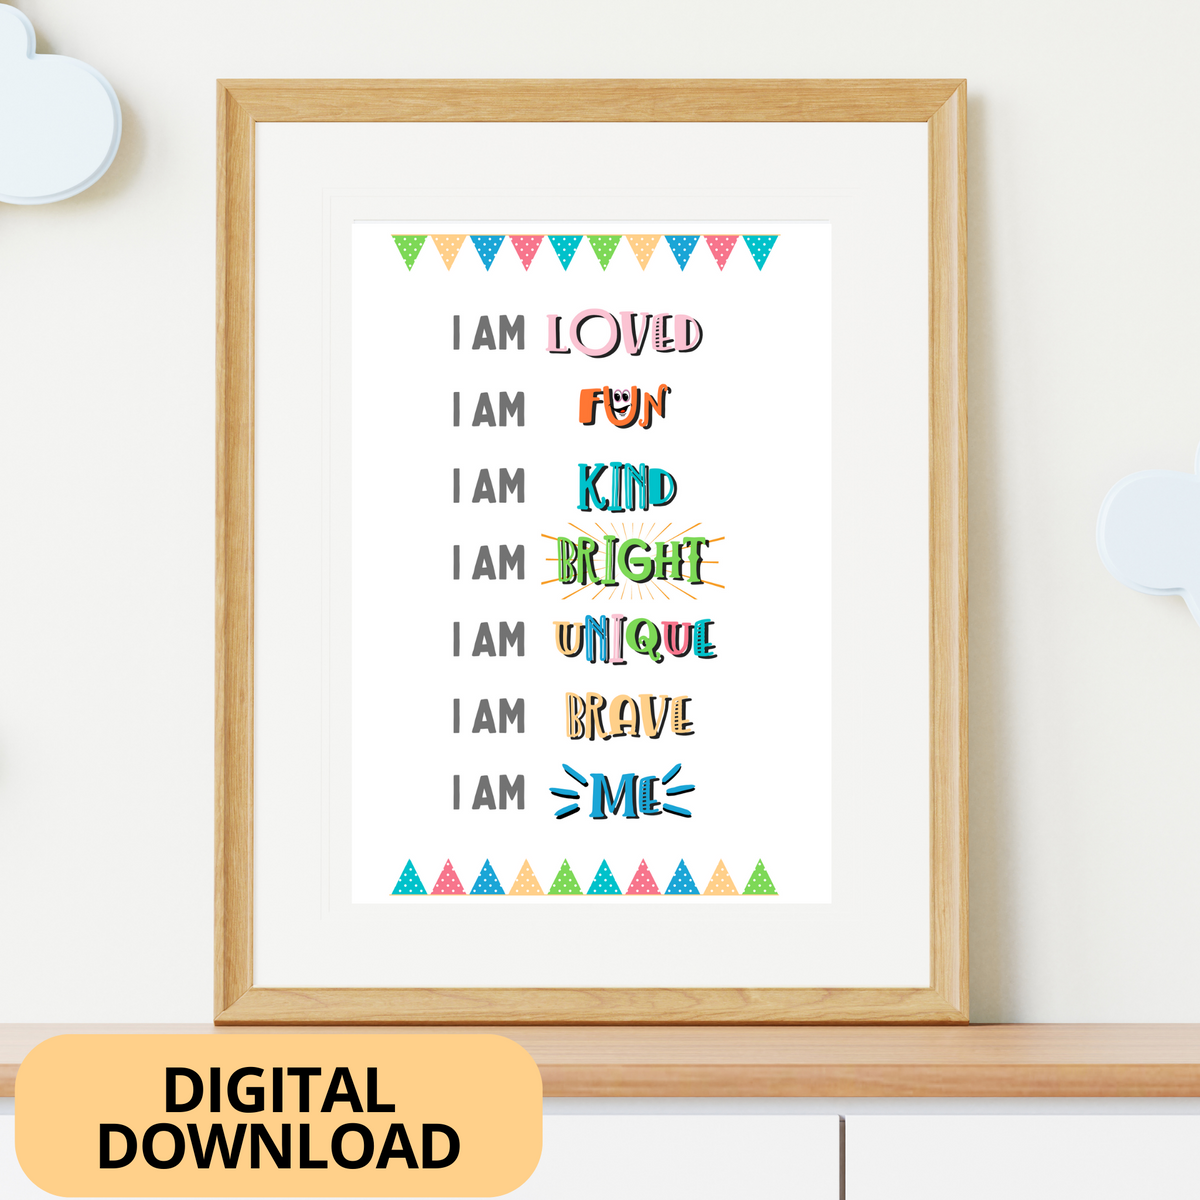 I AM Poster containing colourful self-affirmations for kids, framed in a light wooden frame on top of a chest-of-drawers.